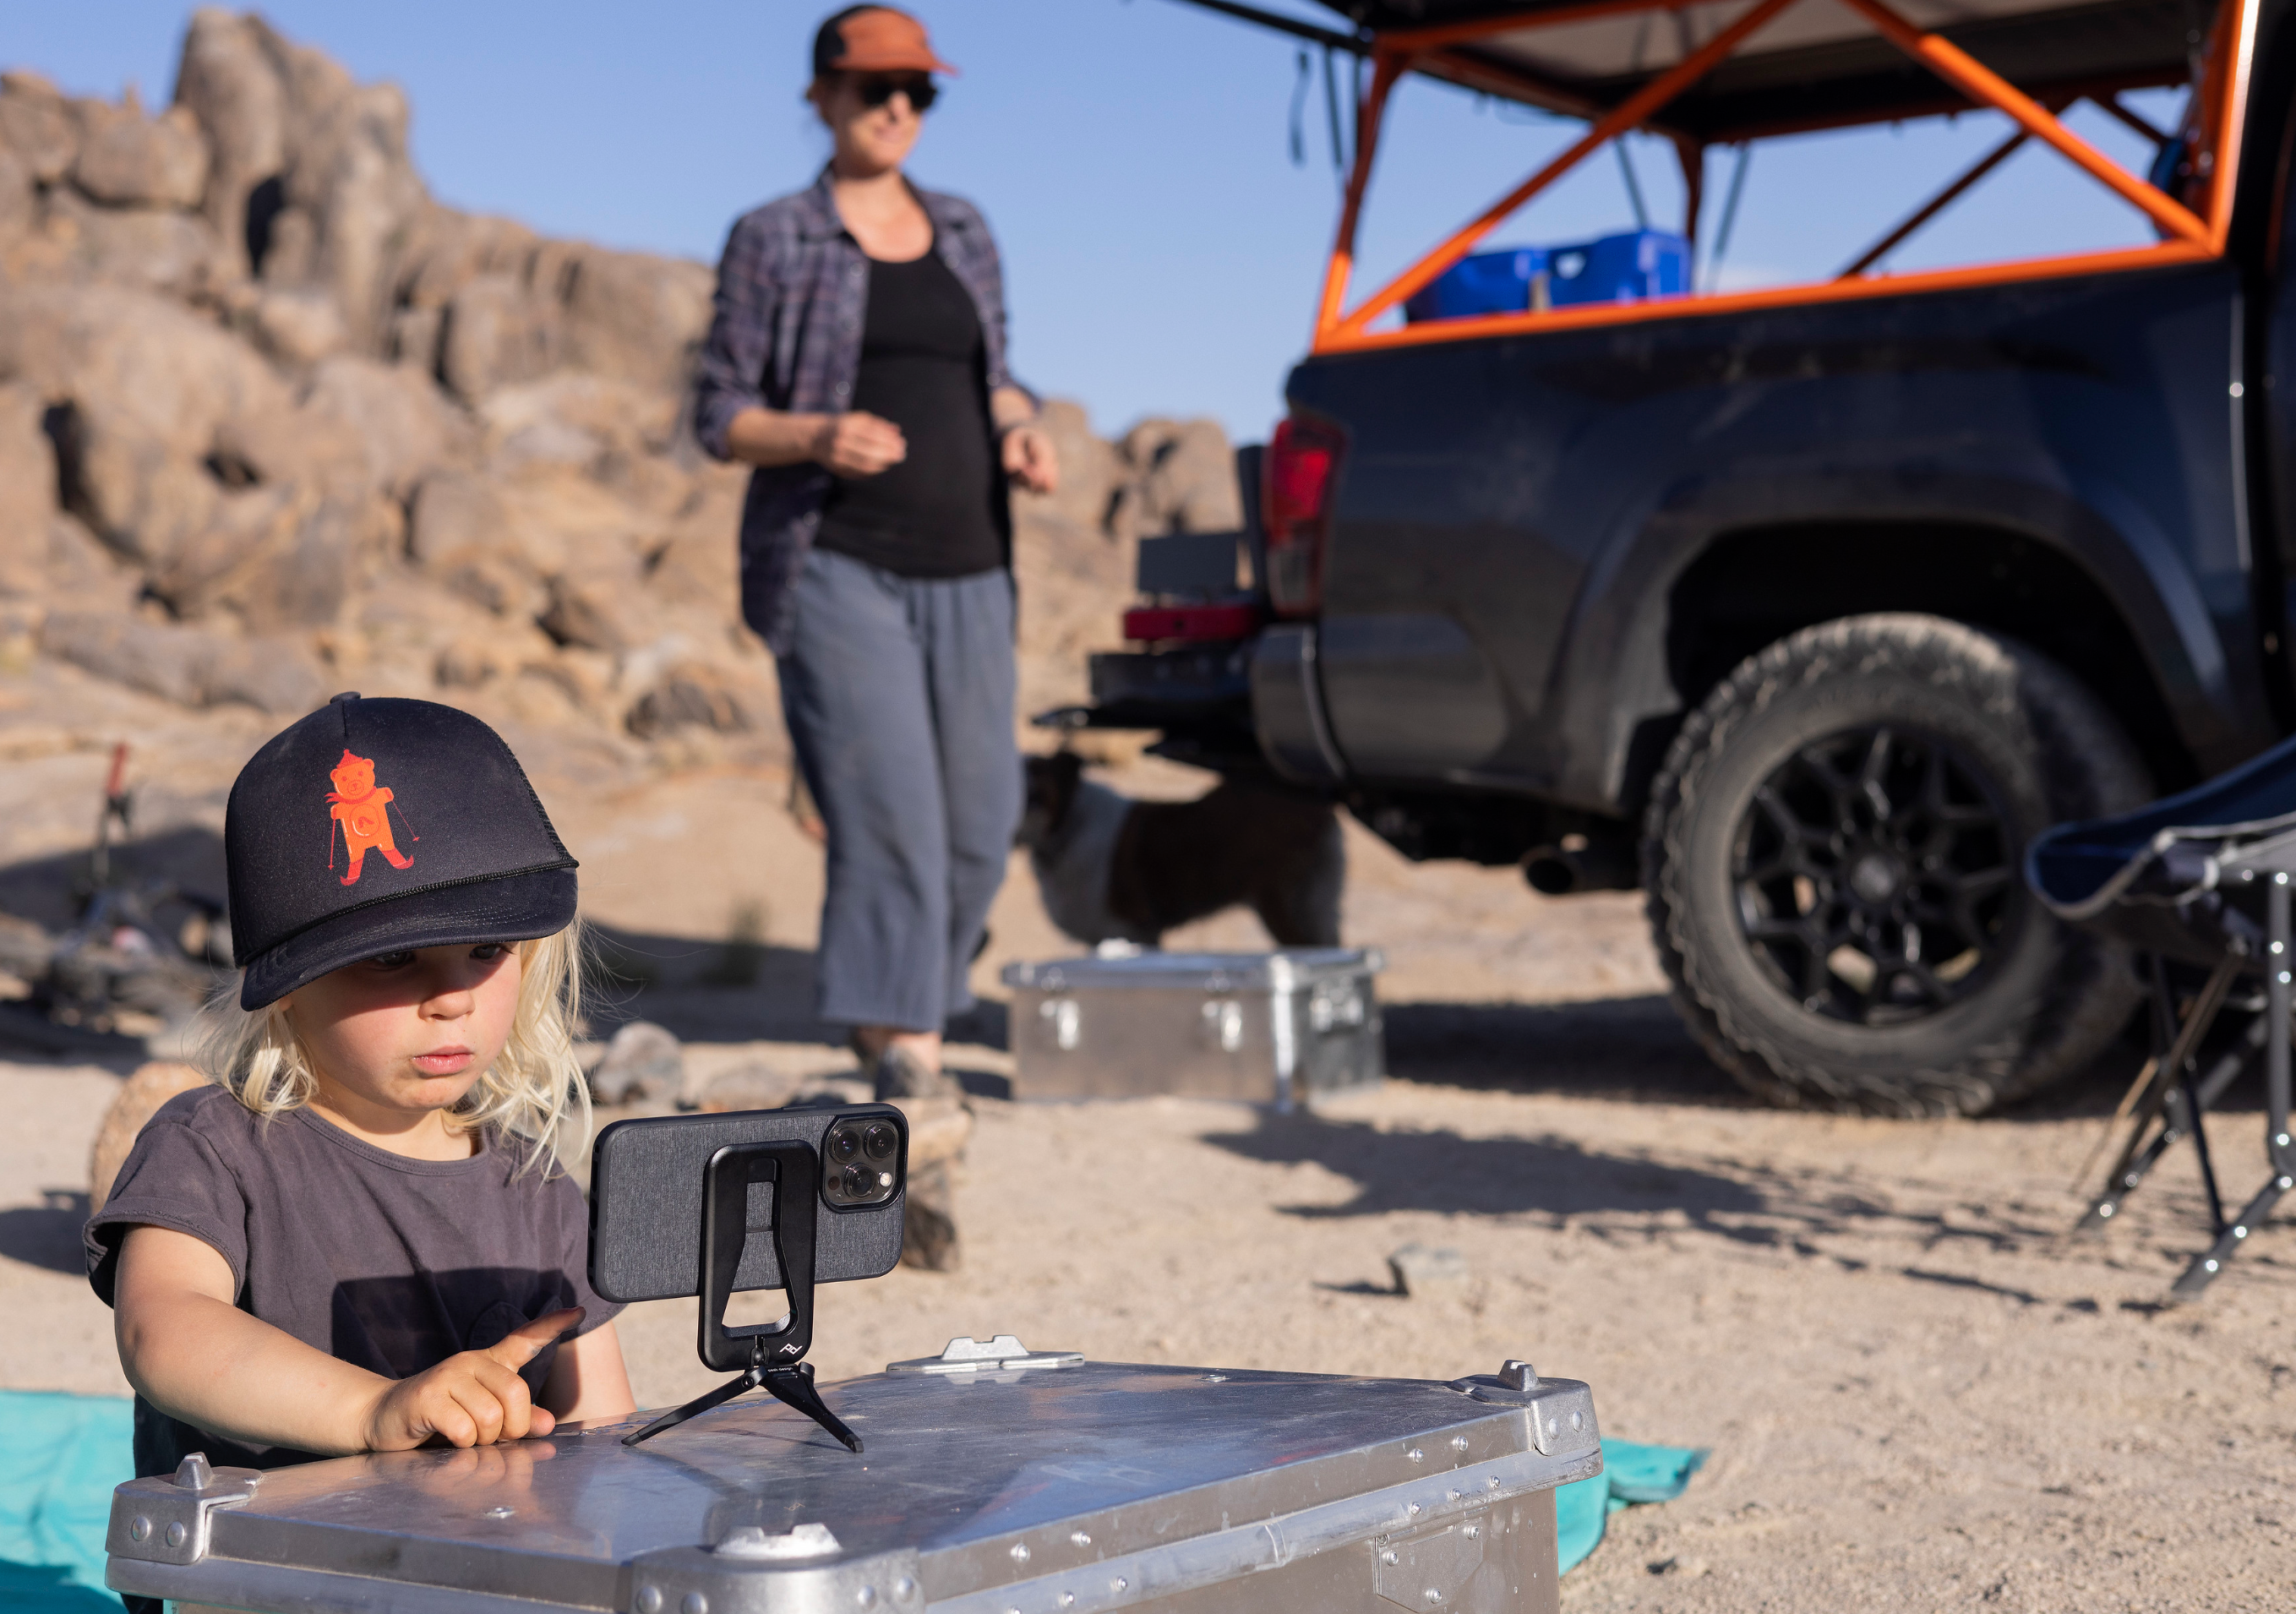 A photo of a woman and her son road tripping using the Peak Design's Mobile Tripot to capture the photo of the nature